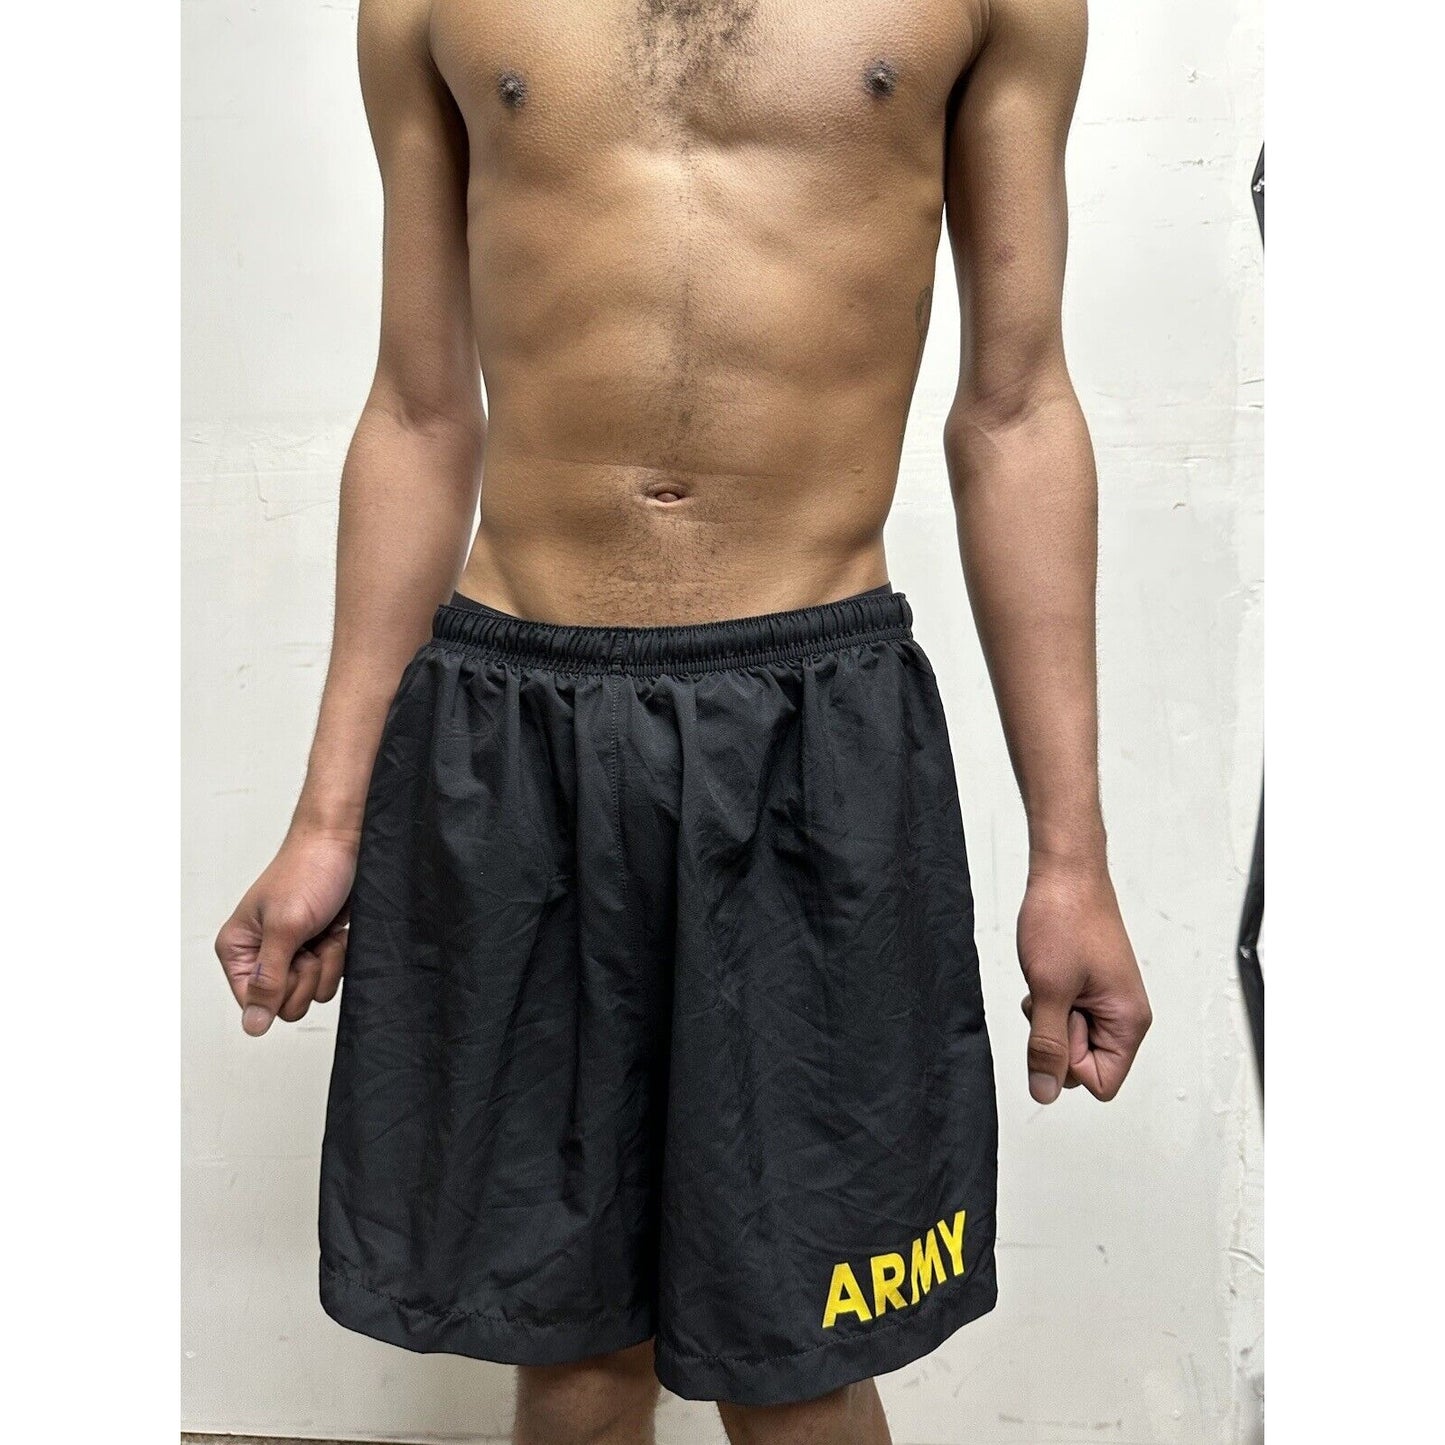 Army black size large physical fitness uniform apfu trunks